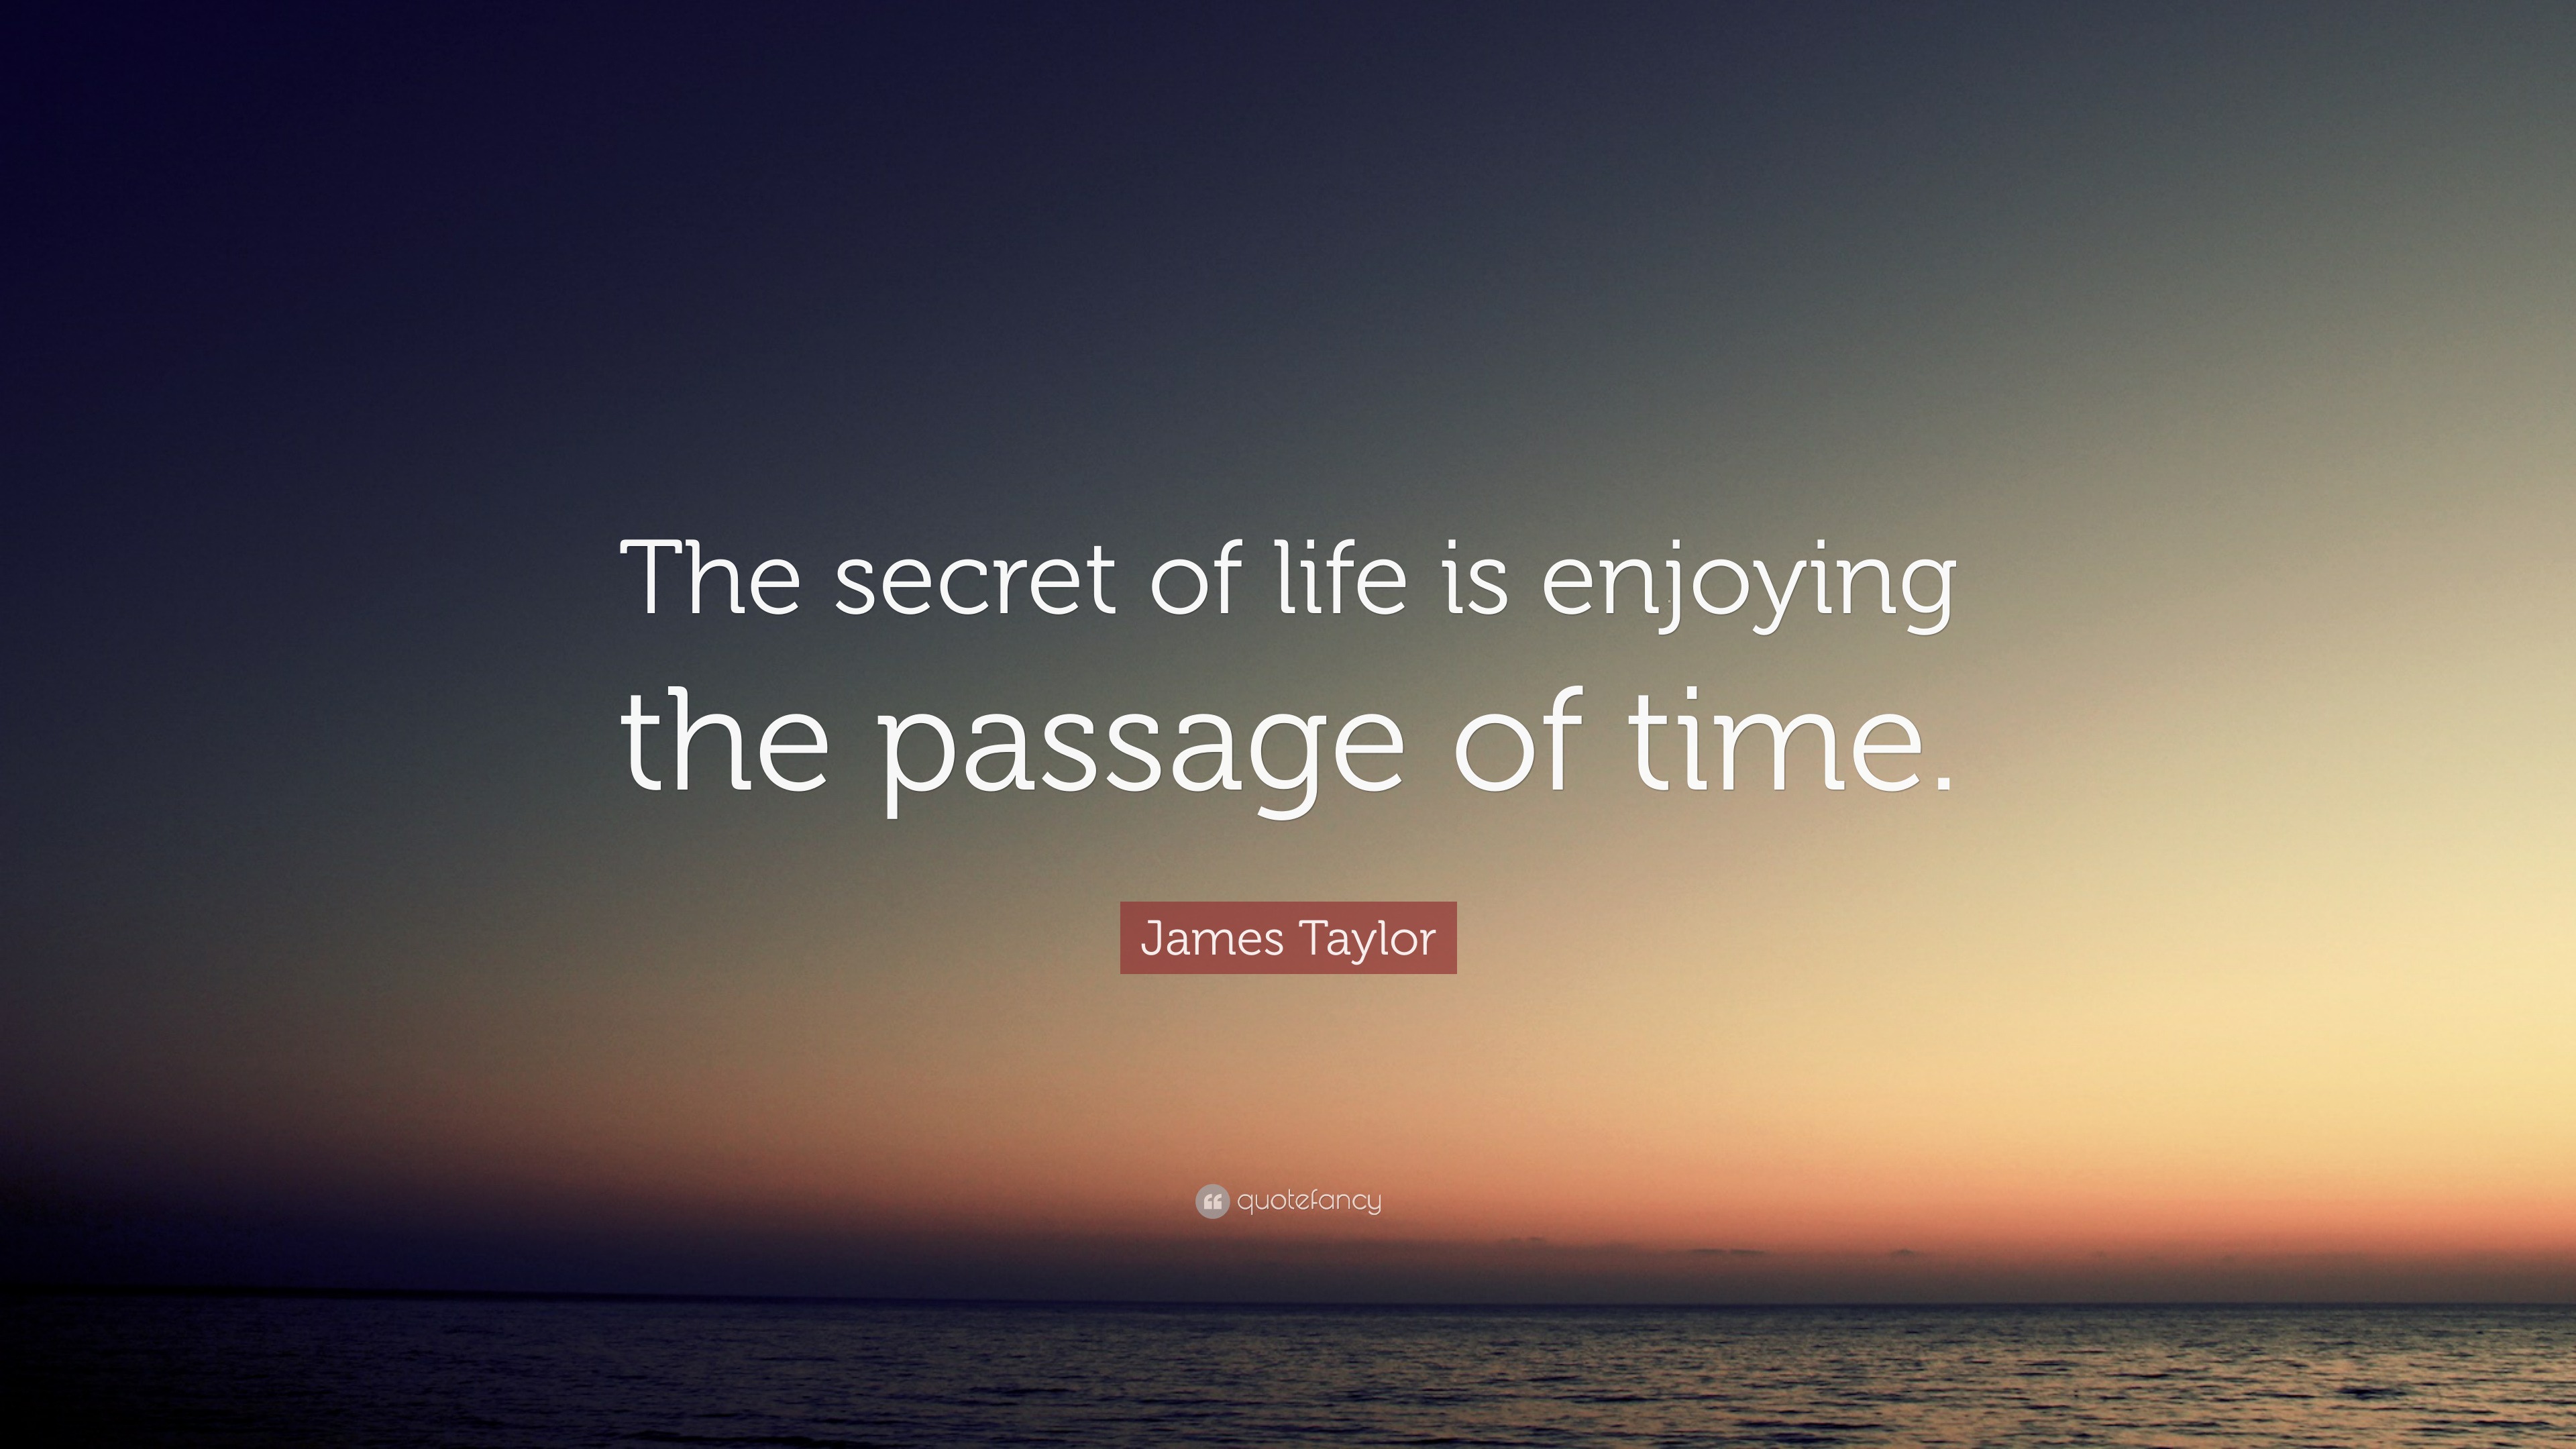 enjoying the life quotes james taylor quote u201cthe secret of life is enjoying the passage of